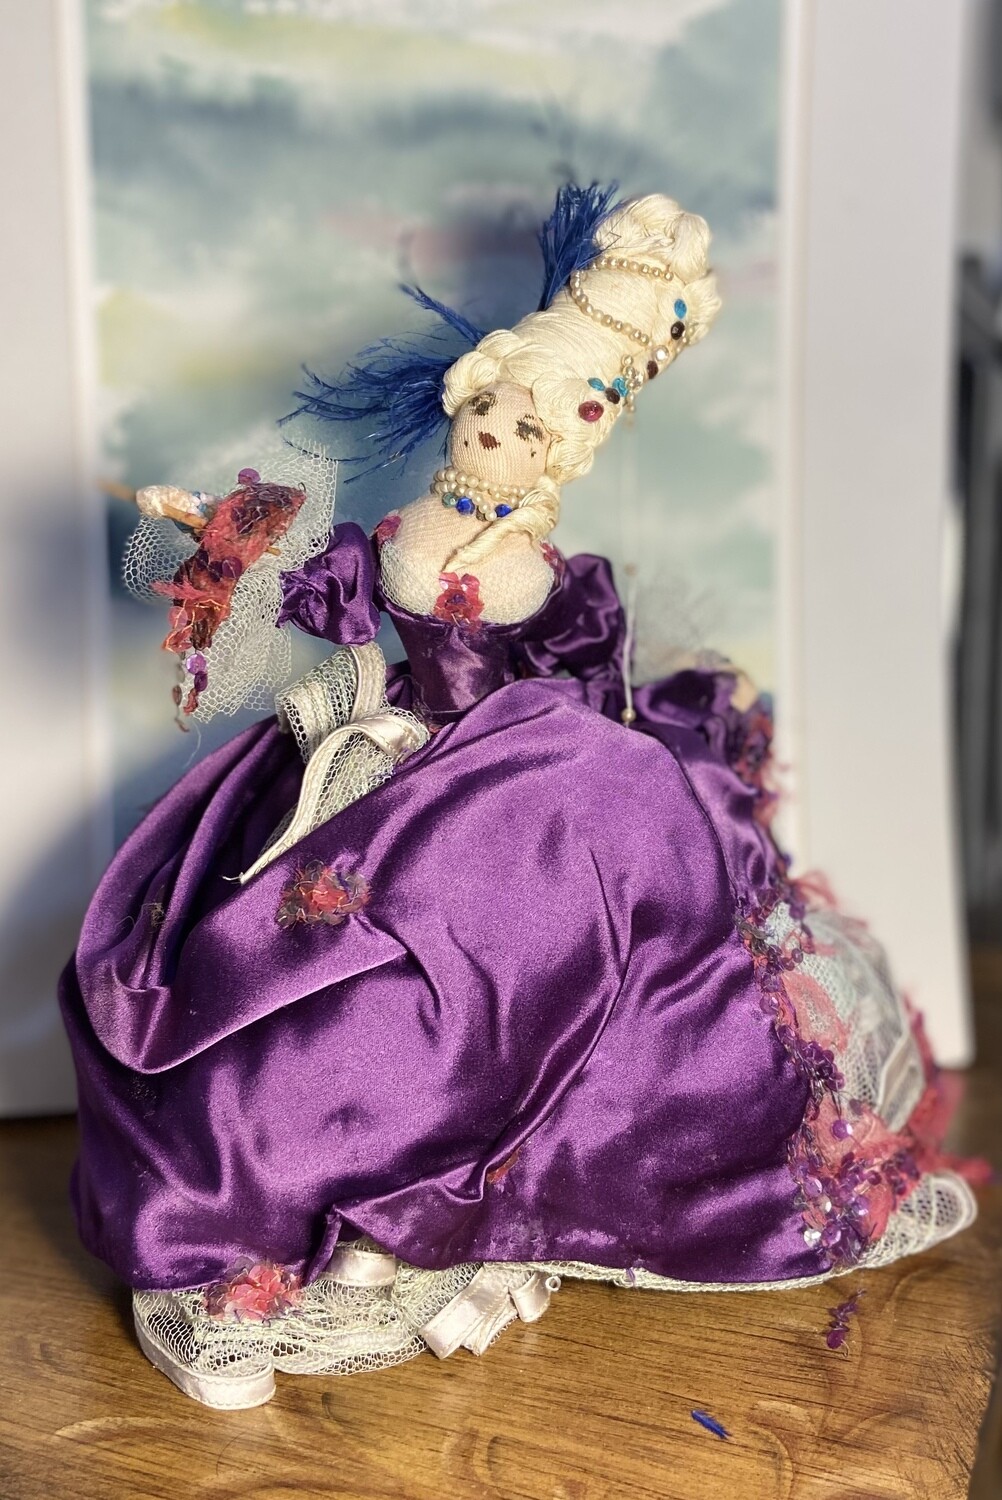 Vintage Posable Queen in Ballgown Doll with Stand